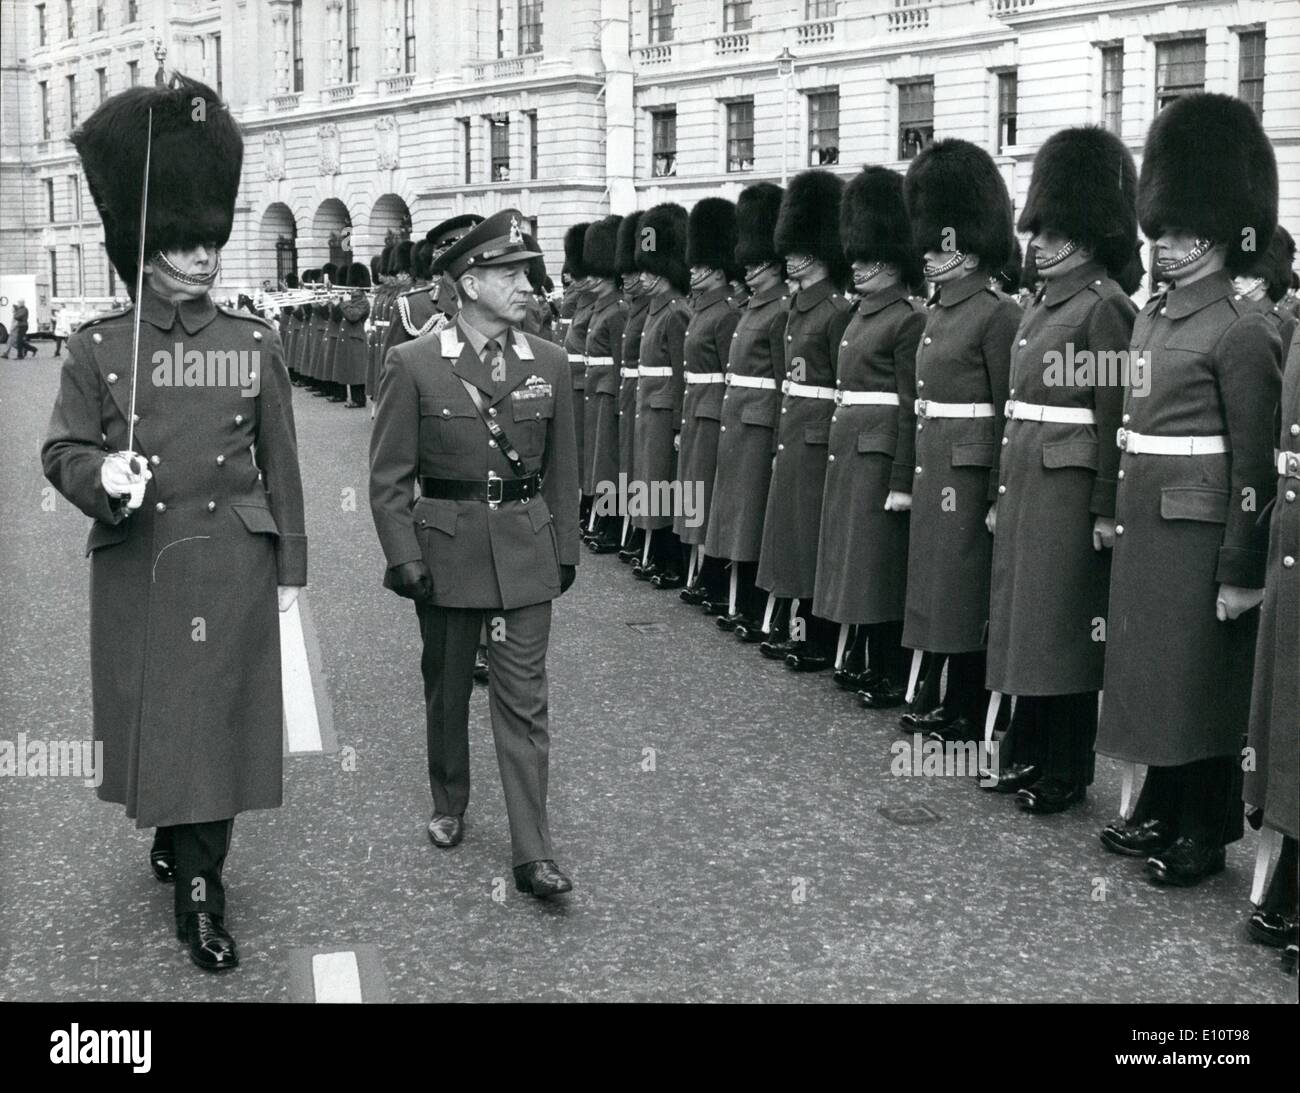 Mar. 03, 1974 - Inspector-General of Norwegian Army visits Ministry of Defence: Major-General O.J. Bangstad, Inspector General of the Norwegian Army, inspecting a Guard of Honour formed by the 2nd. Battalion Coldstream Guards, when he visited the ministry of Defence in London yesterday. Stock Photo